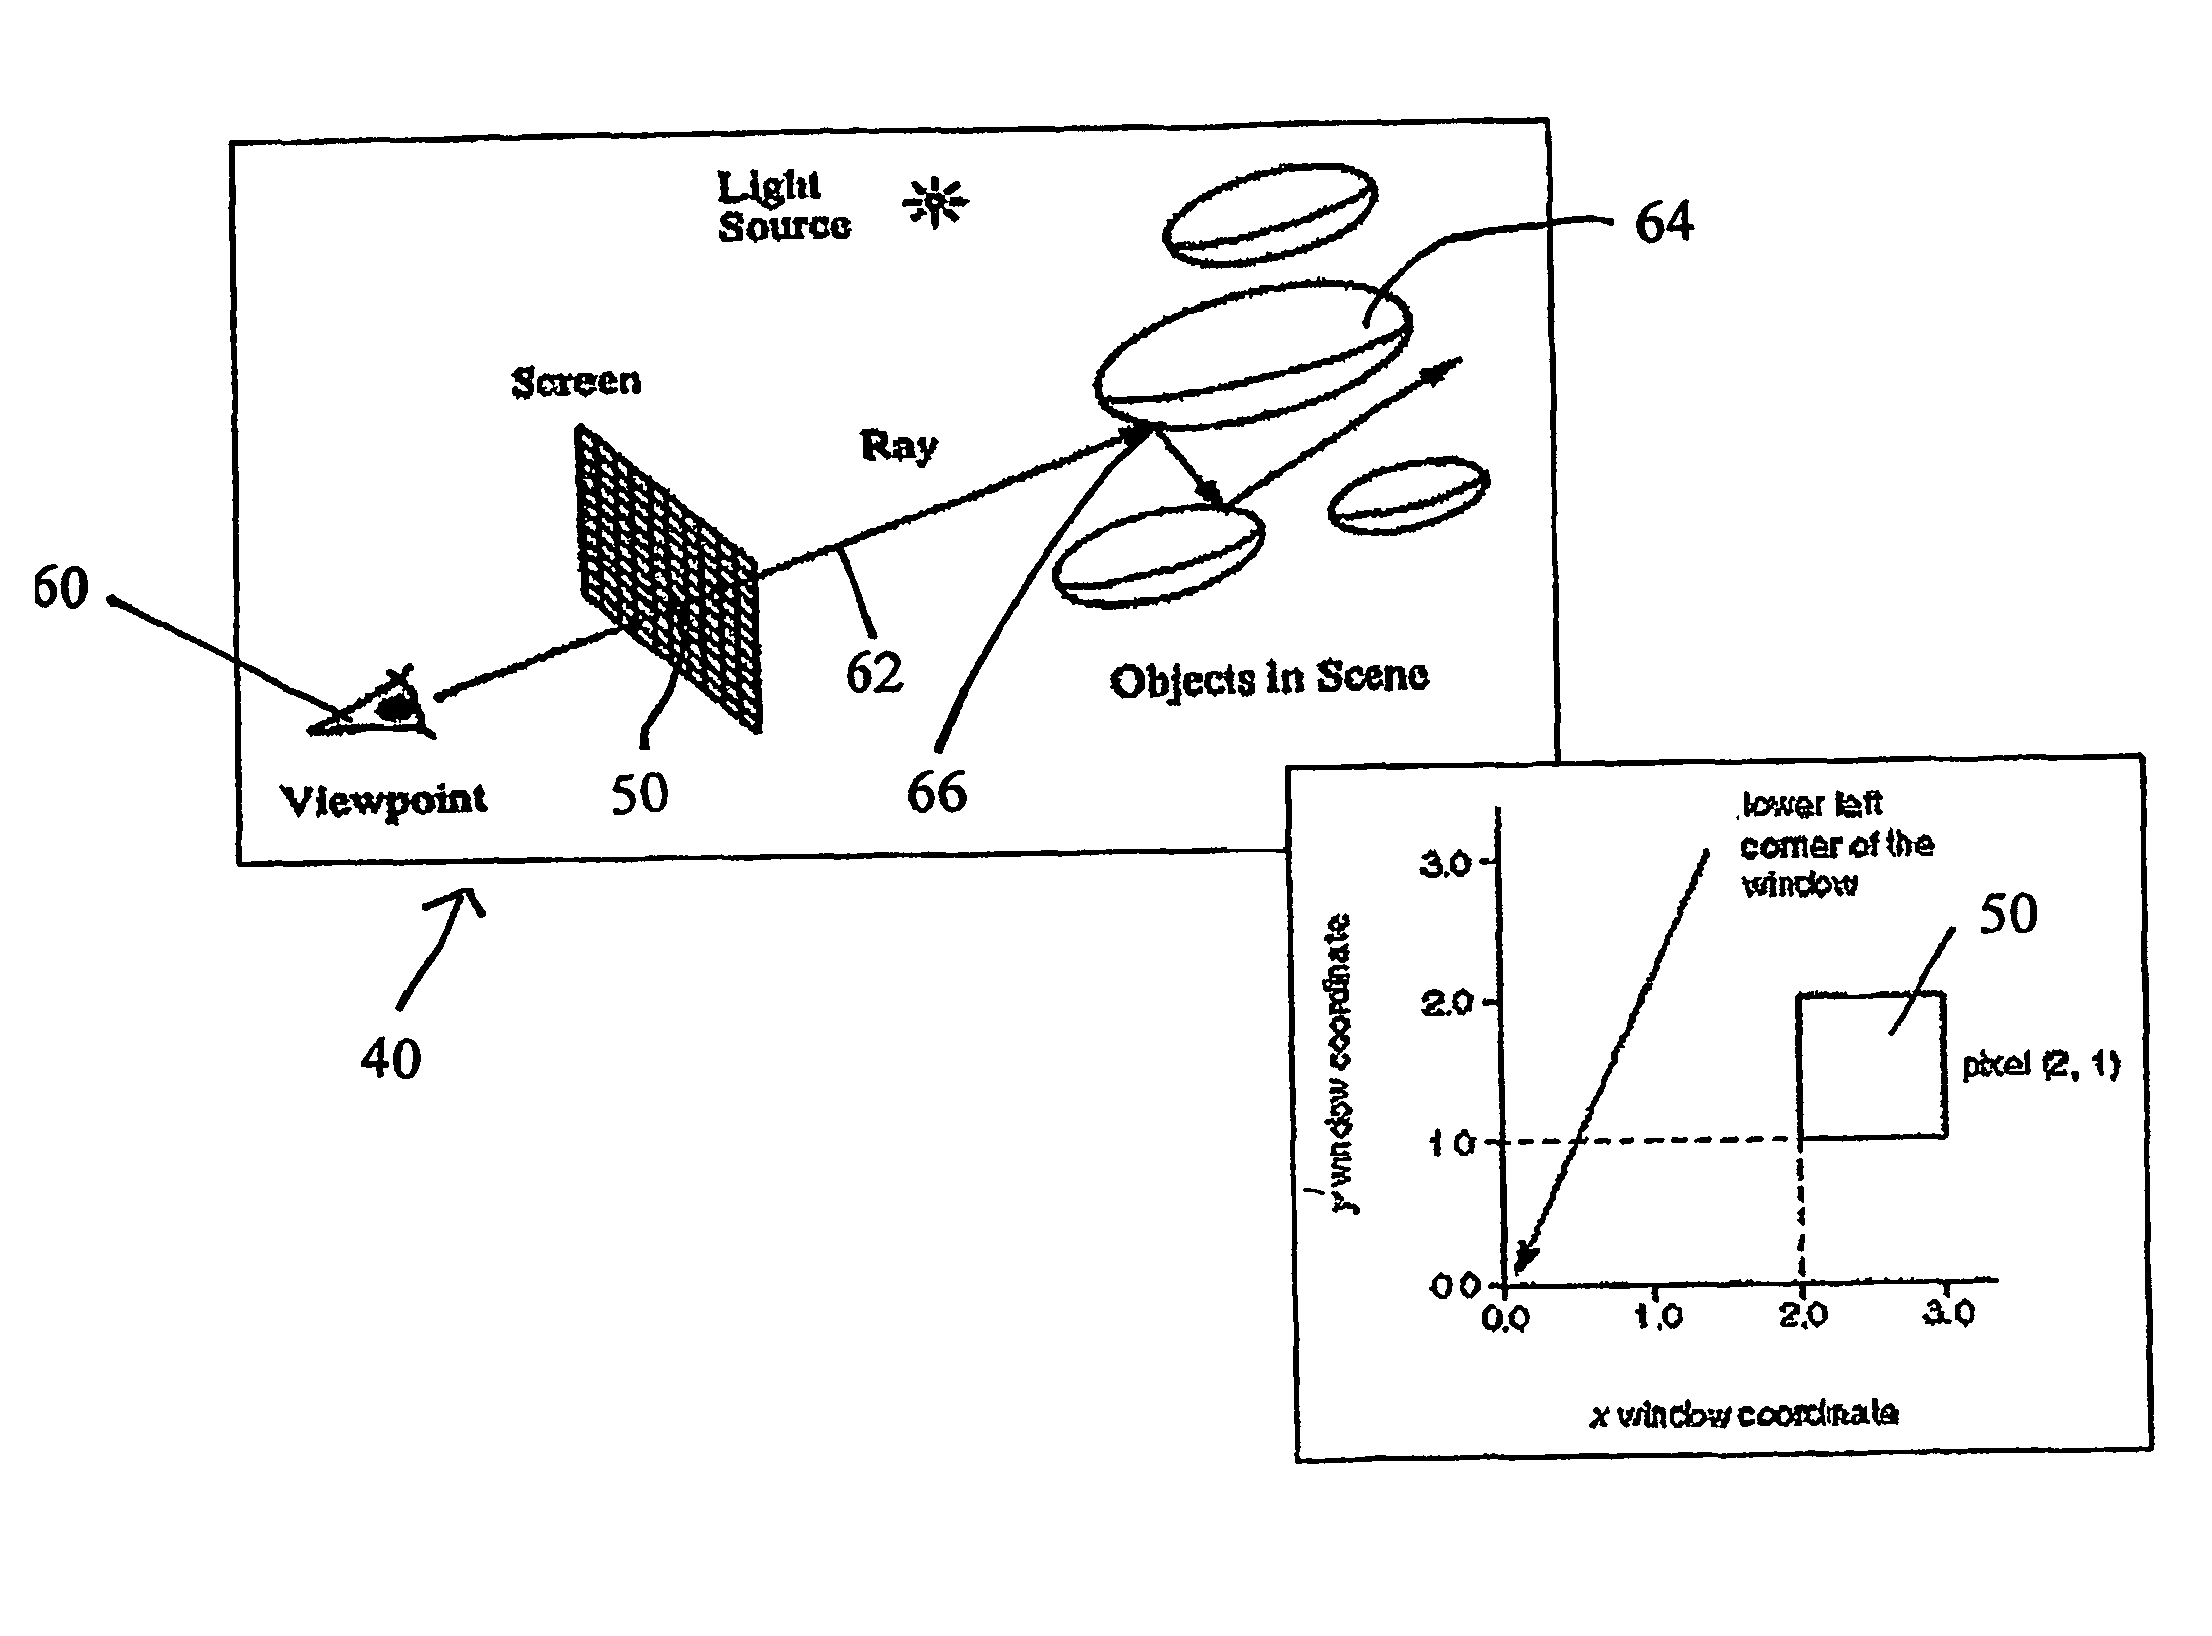 System and method visible surface determination in computer graphics using interval analysis